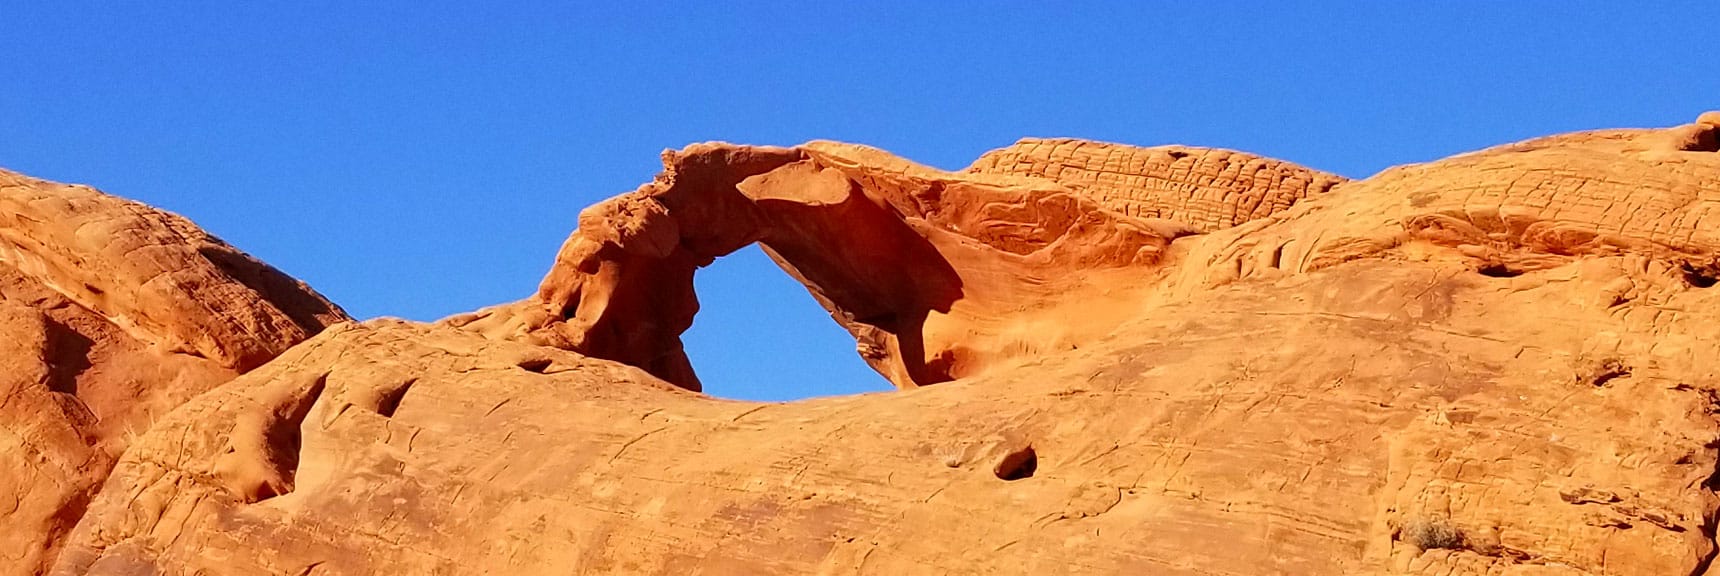 Arch Rock in Valley of Fire State Park, Nevada